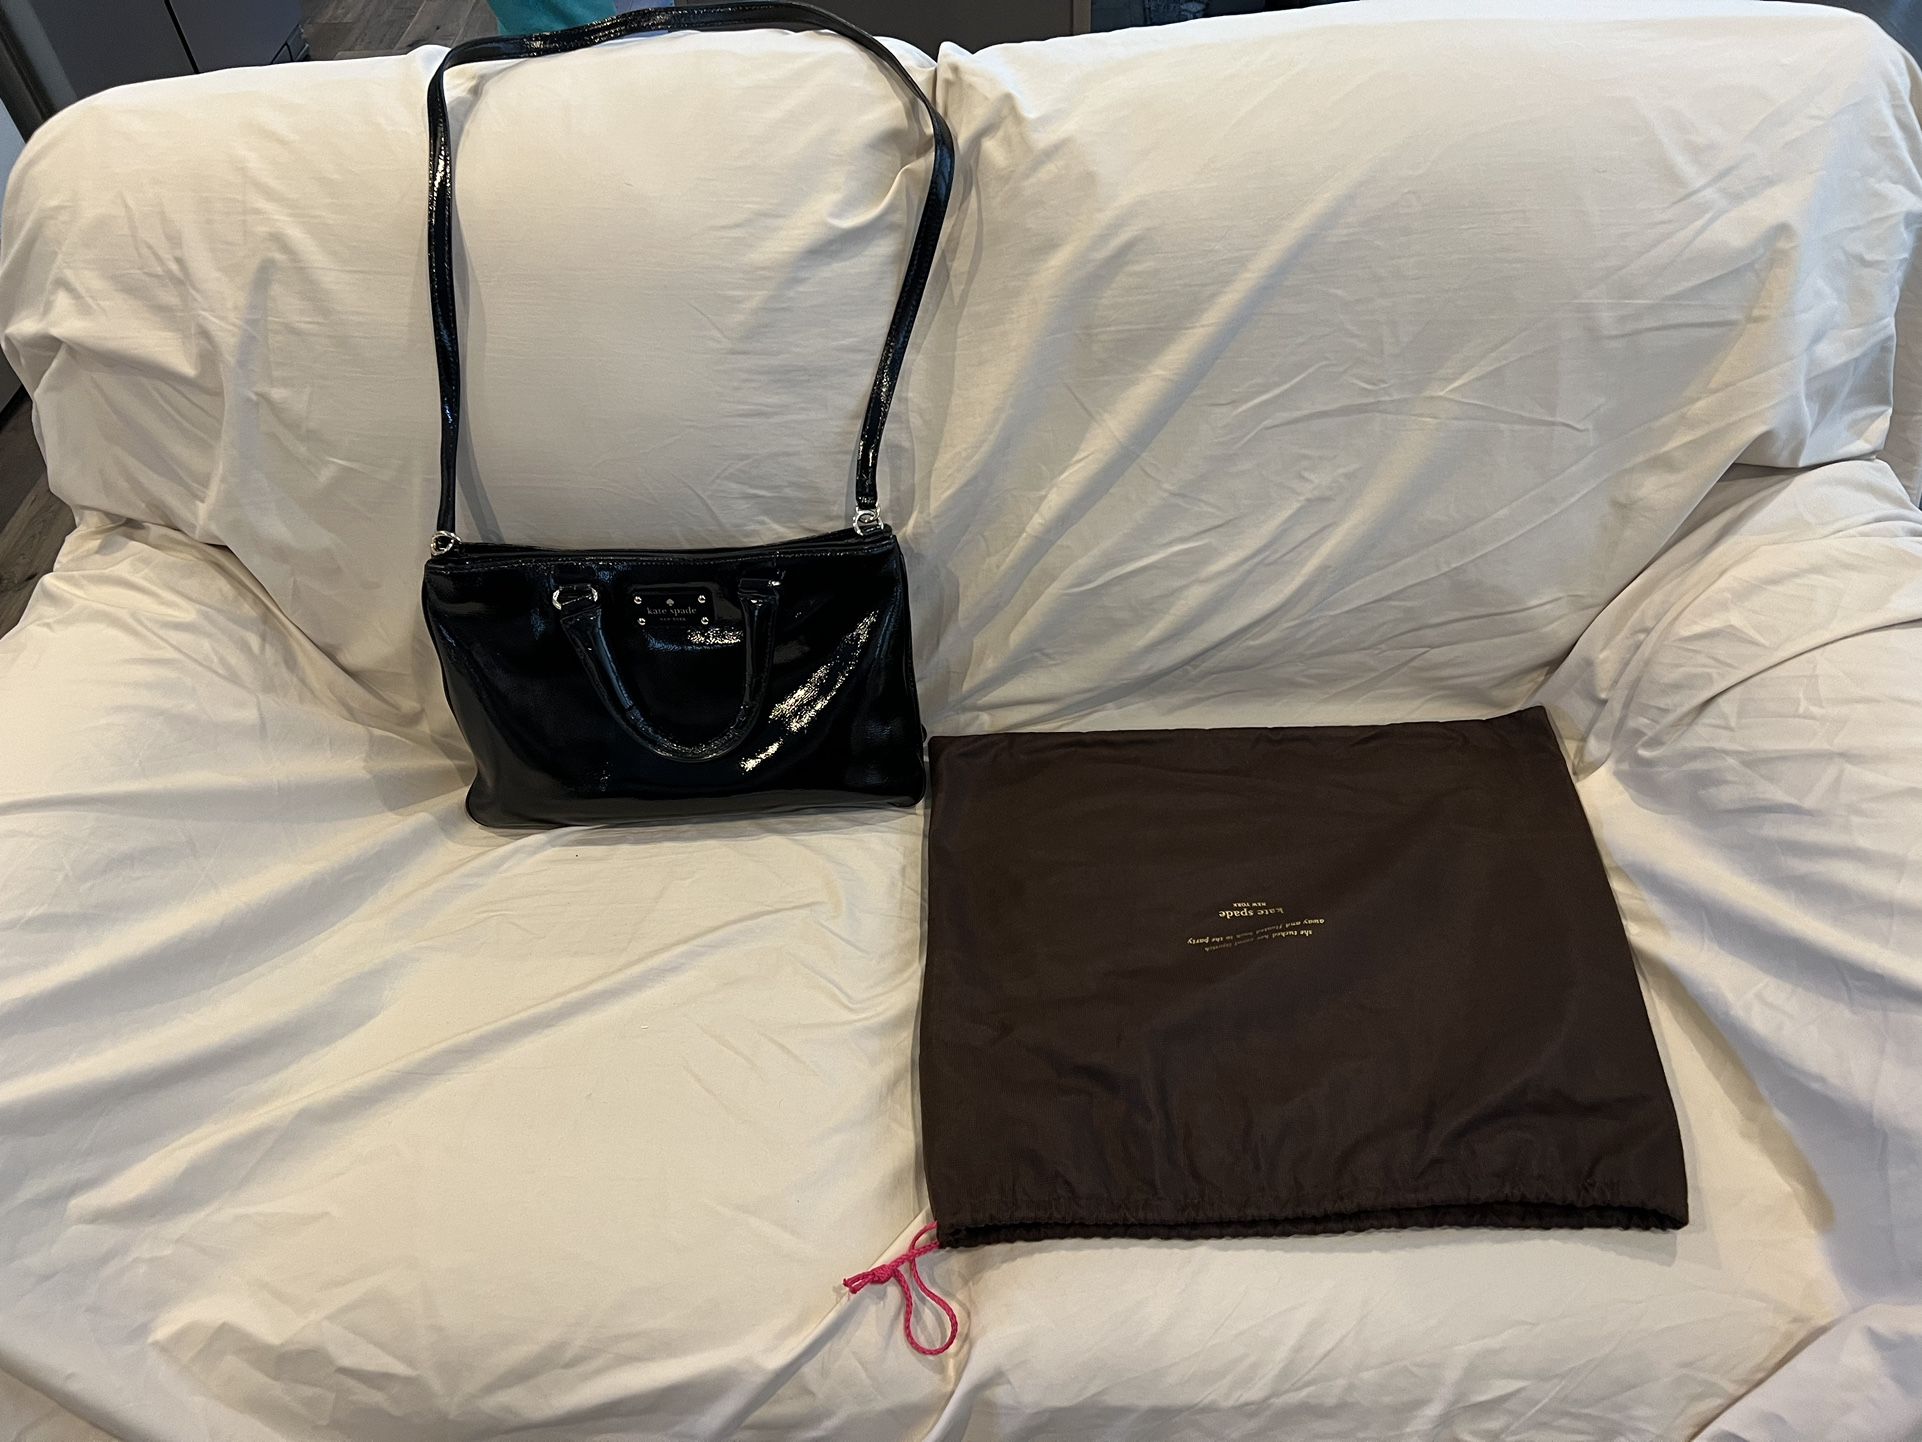 Women’s Purse, Used Once